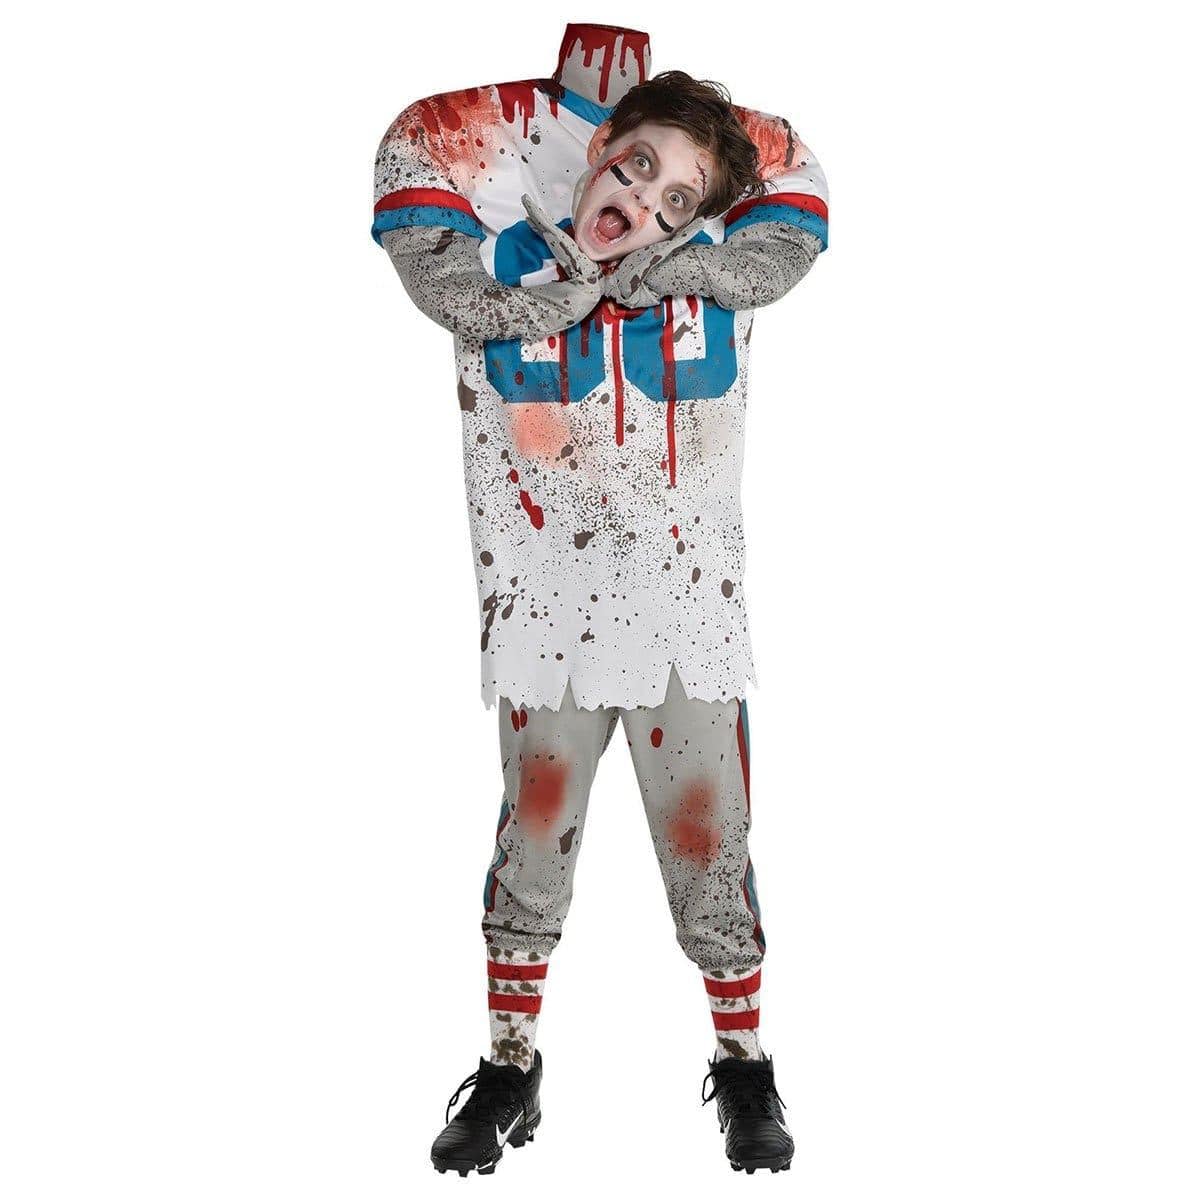 Buy Costumes Headless Football Player Costume for Kids sold at Party Expert